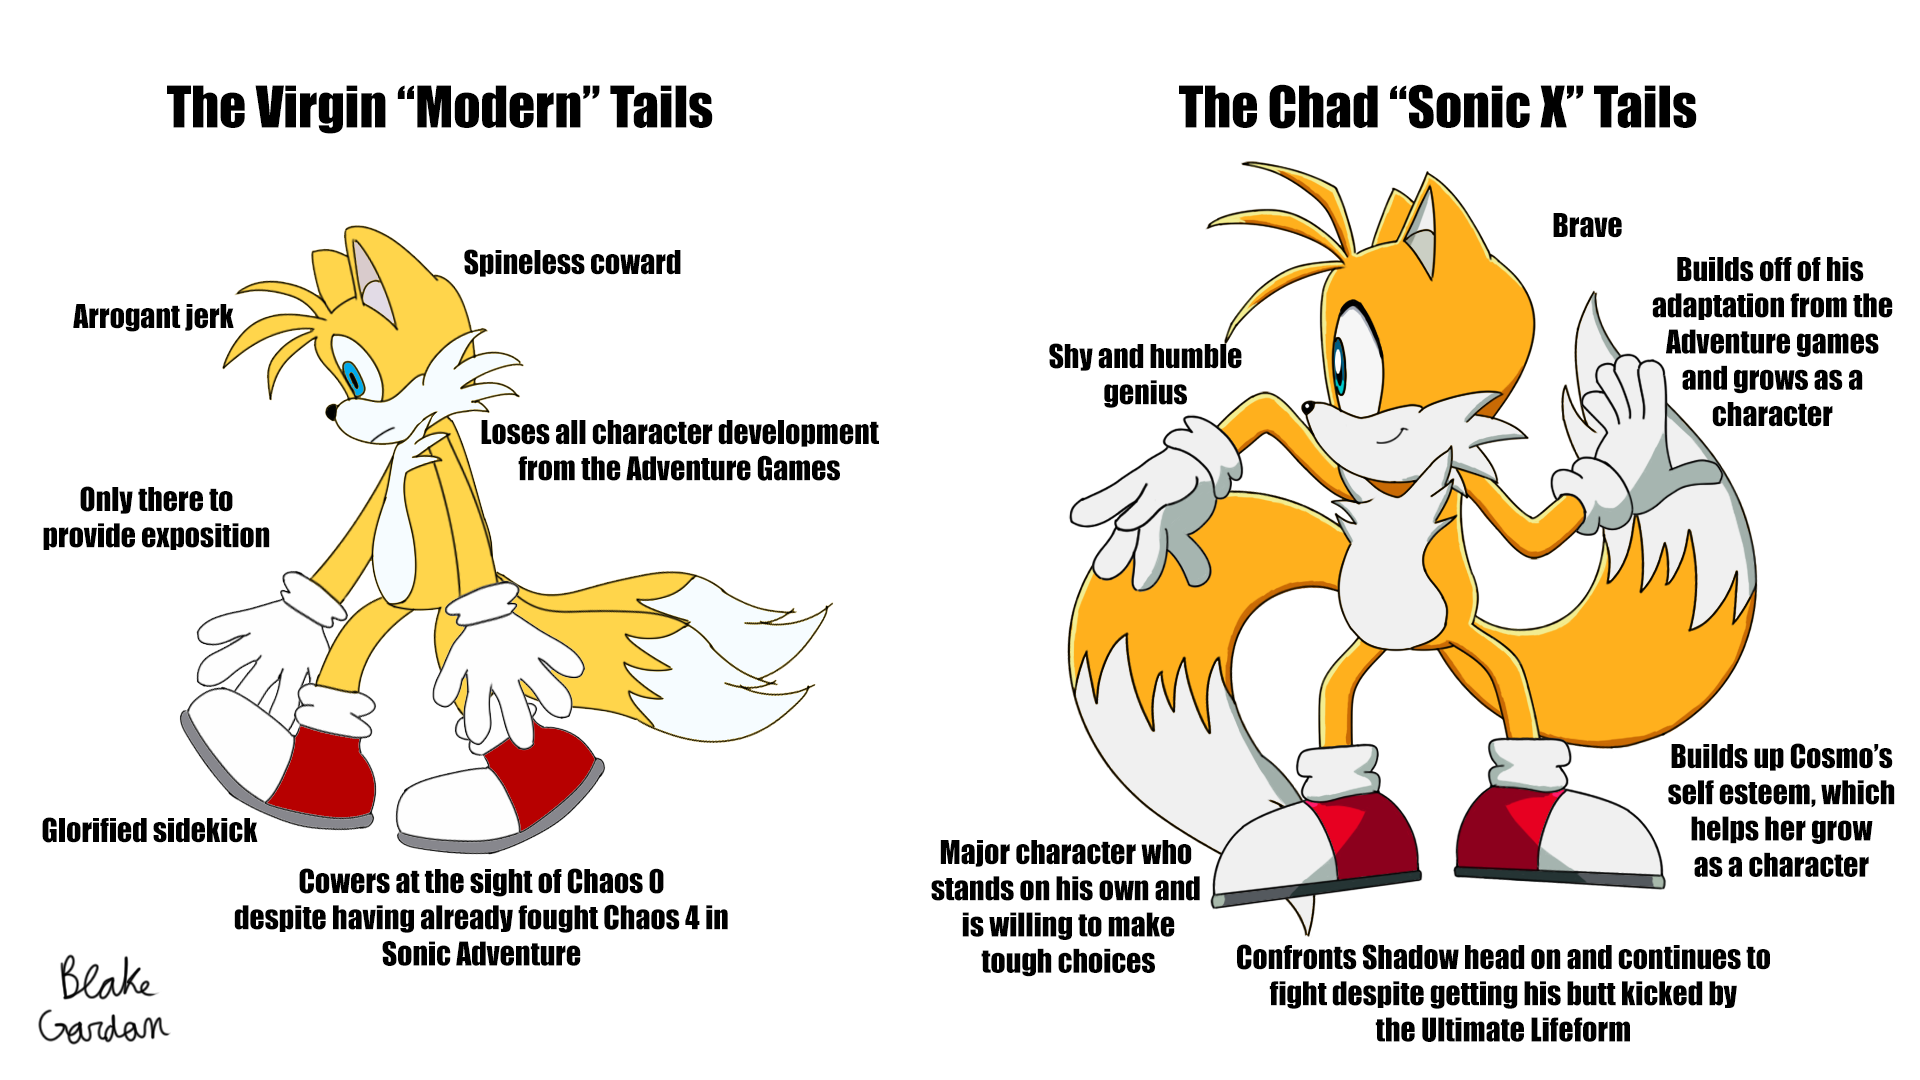 Tails Gets Trolled on X: the virgin yes chad vs. the chad no hulk